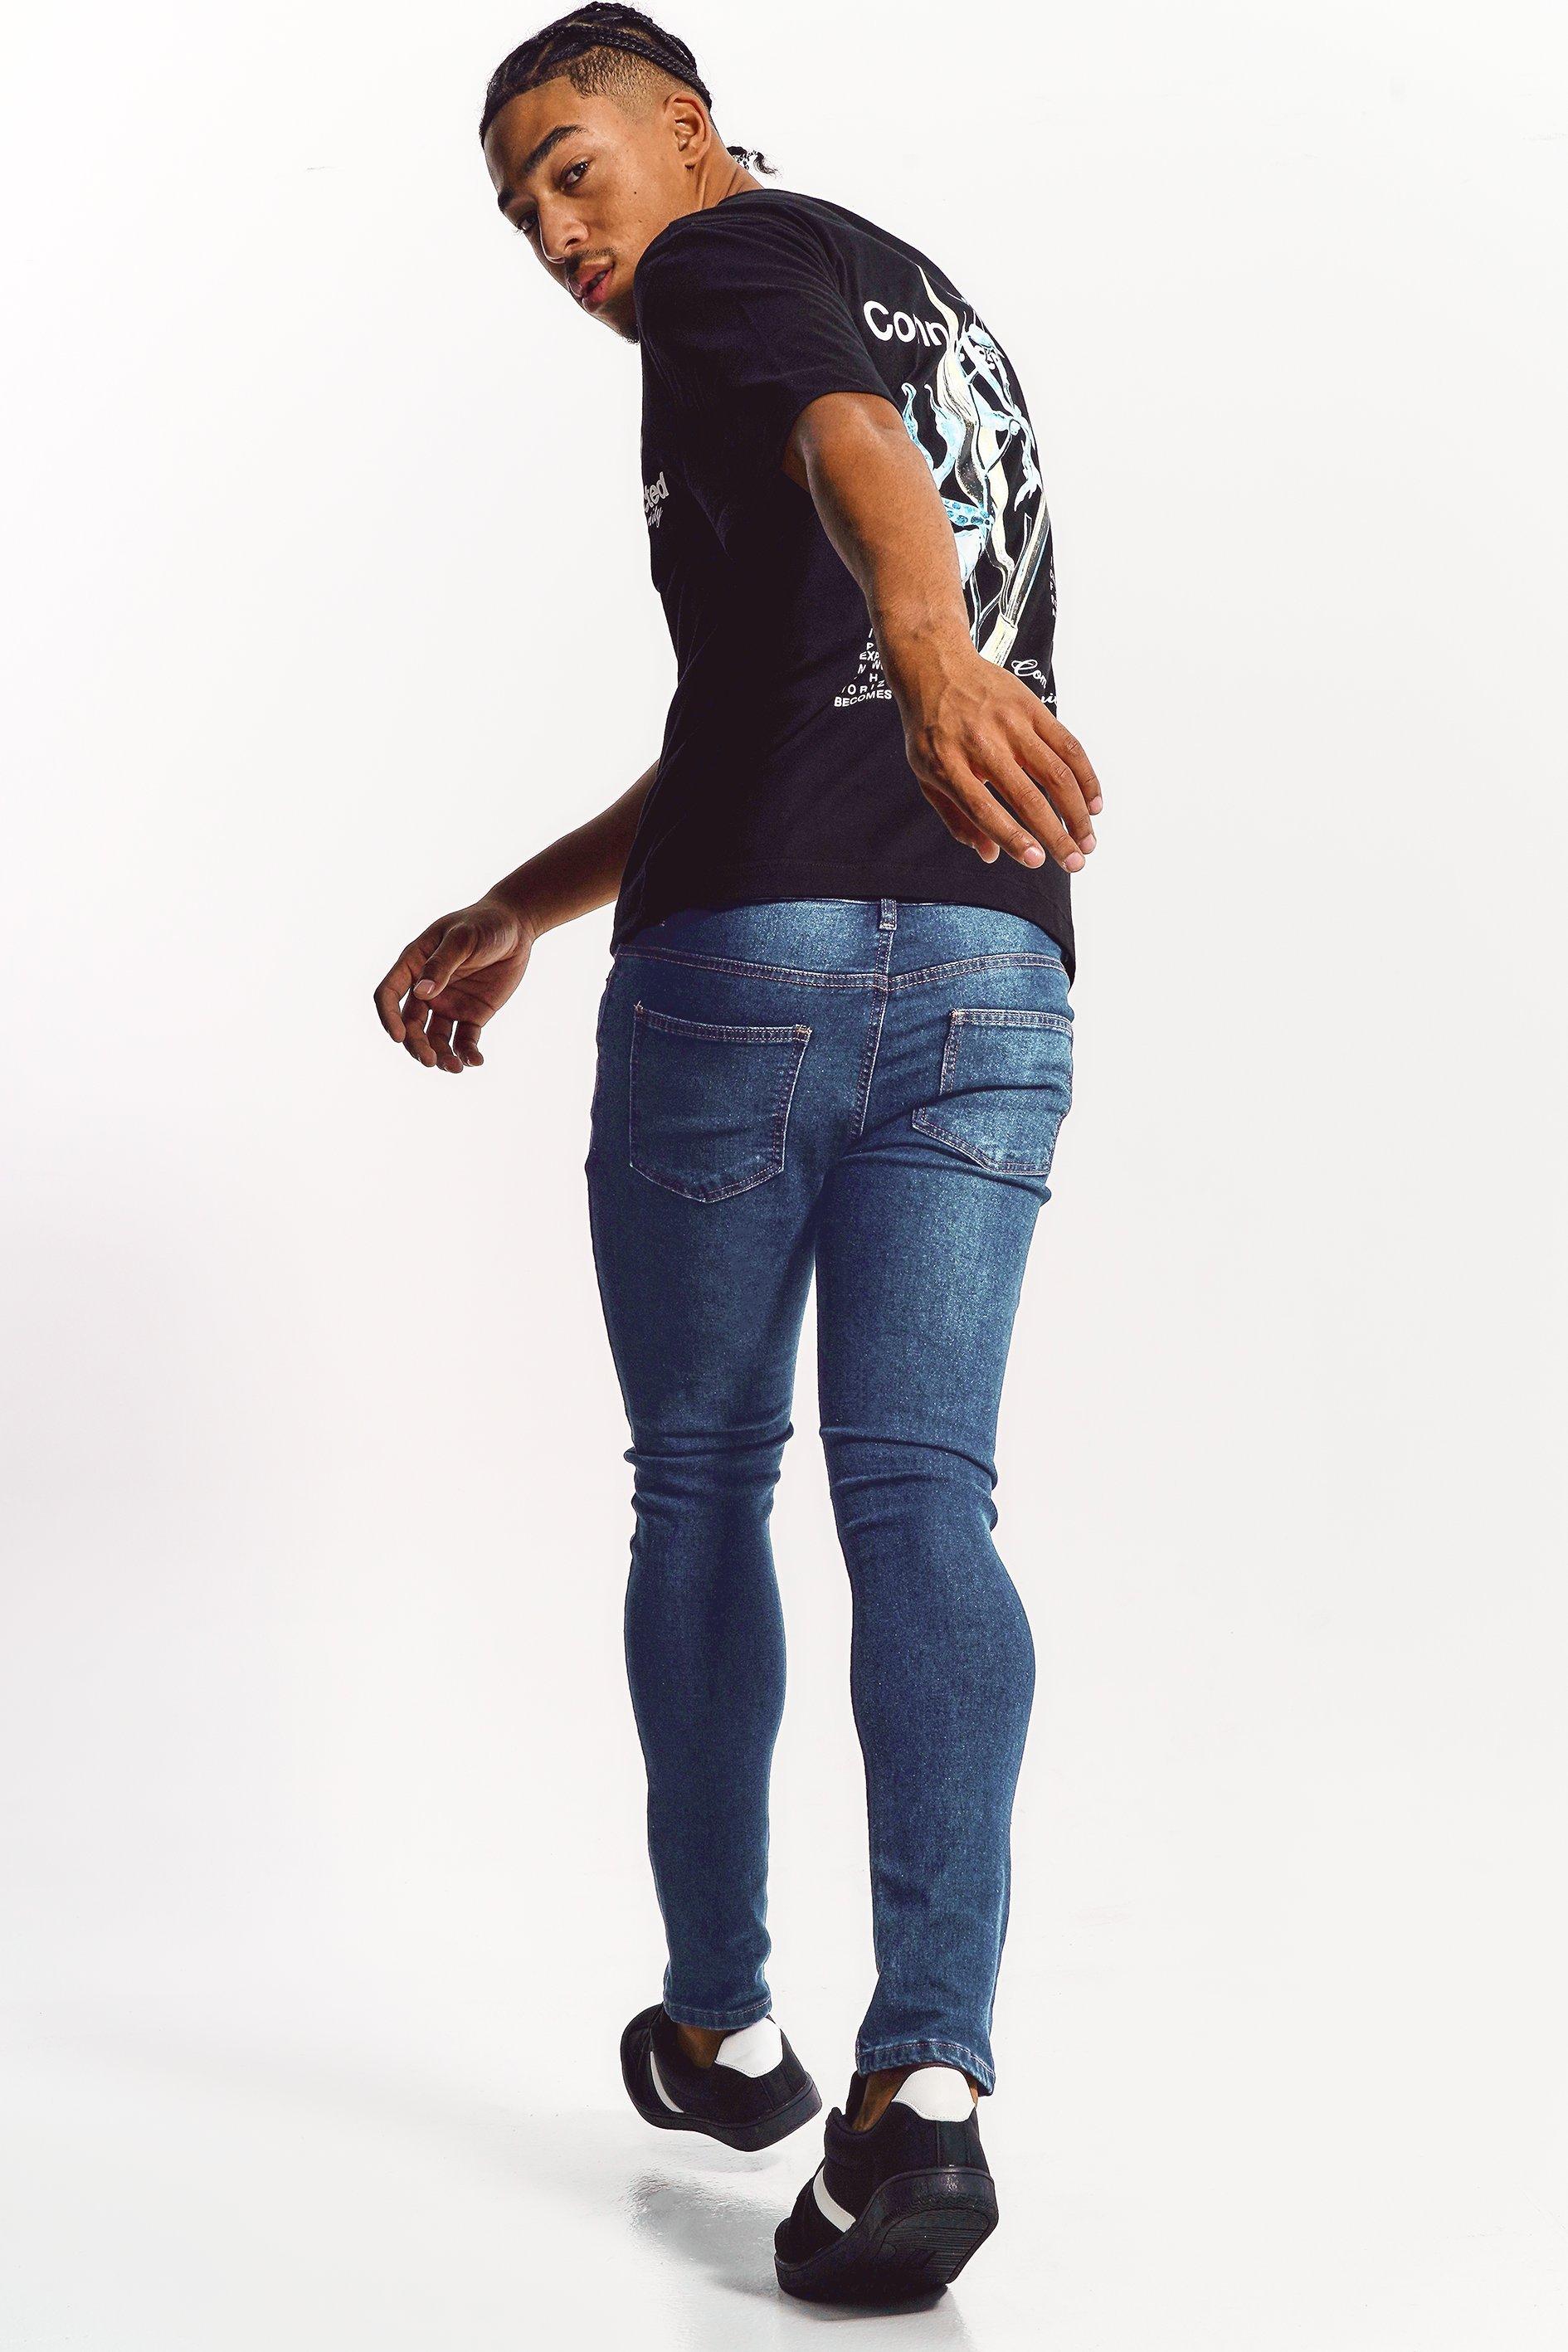 Mr Price | Men's Denim jeans | Fit, skinny and spray on jeans | South Africa